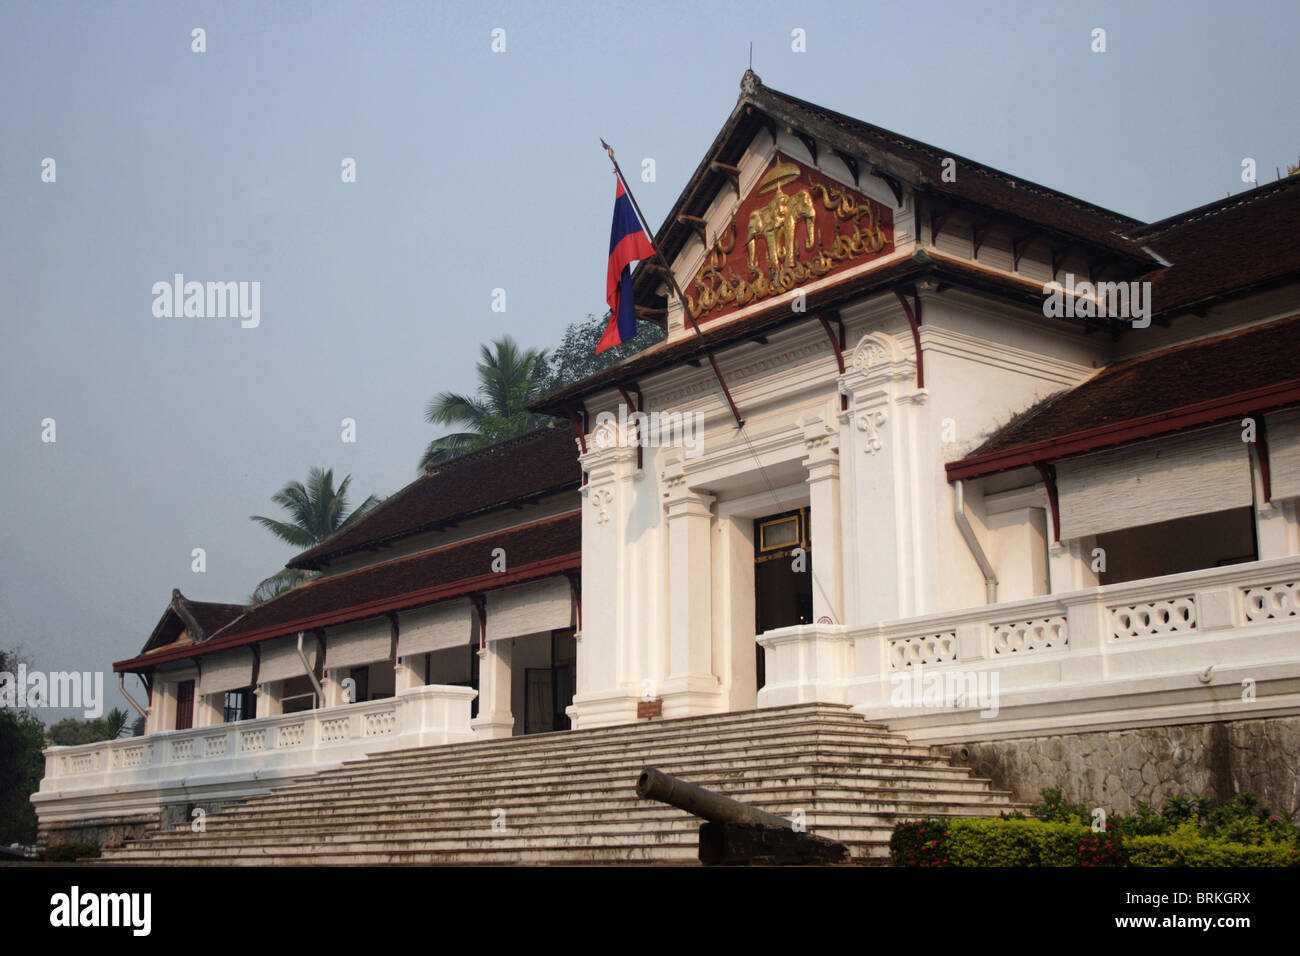 The Royal Palace Museum in Luang Prabang, Laos, awaits throngs of tourists who visit the Communist building each day. Stock Photo